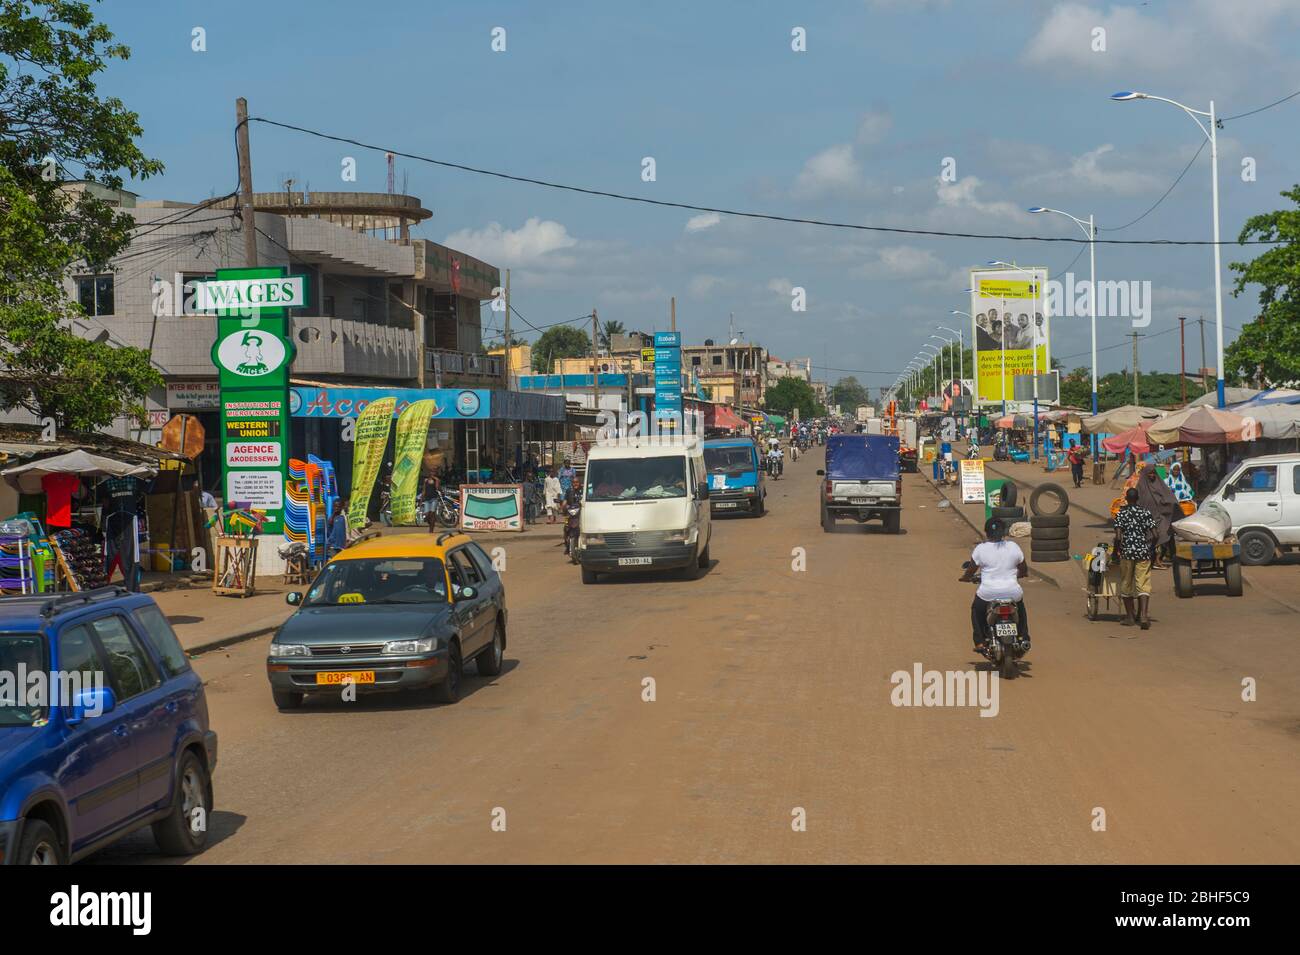 Street scene with motor scooters in Lome, Togo. Stock Photo